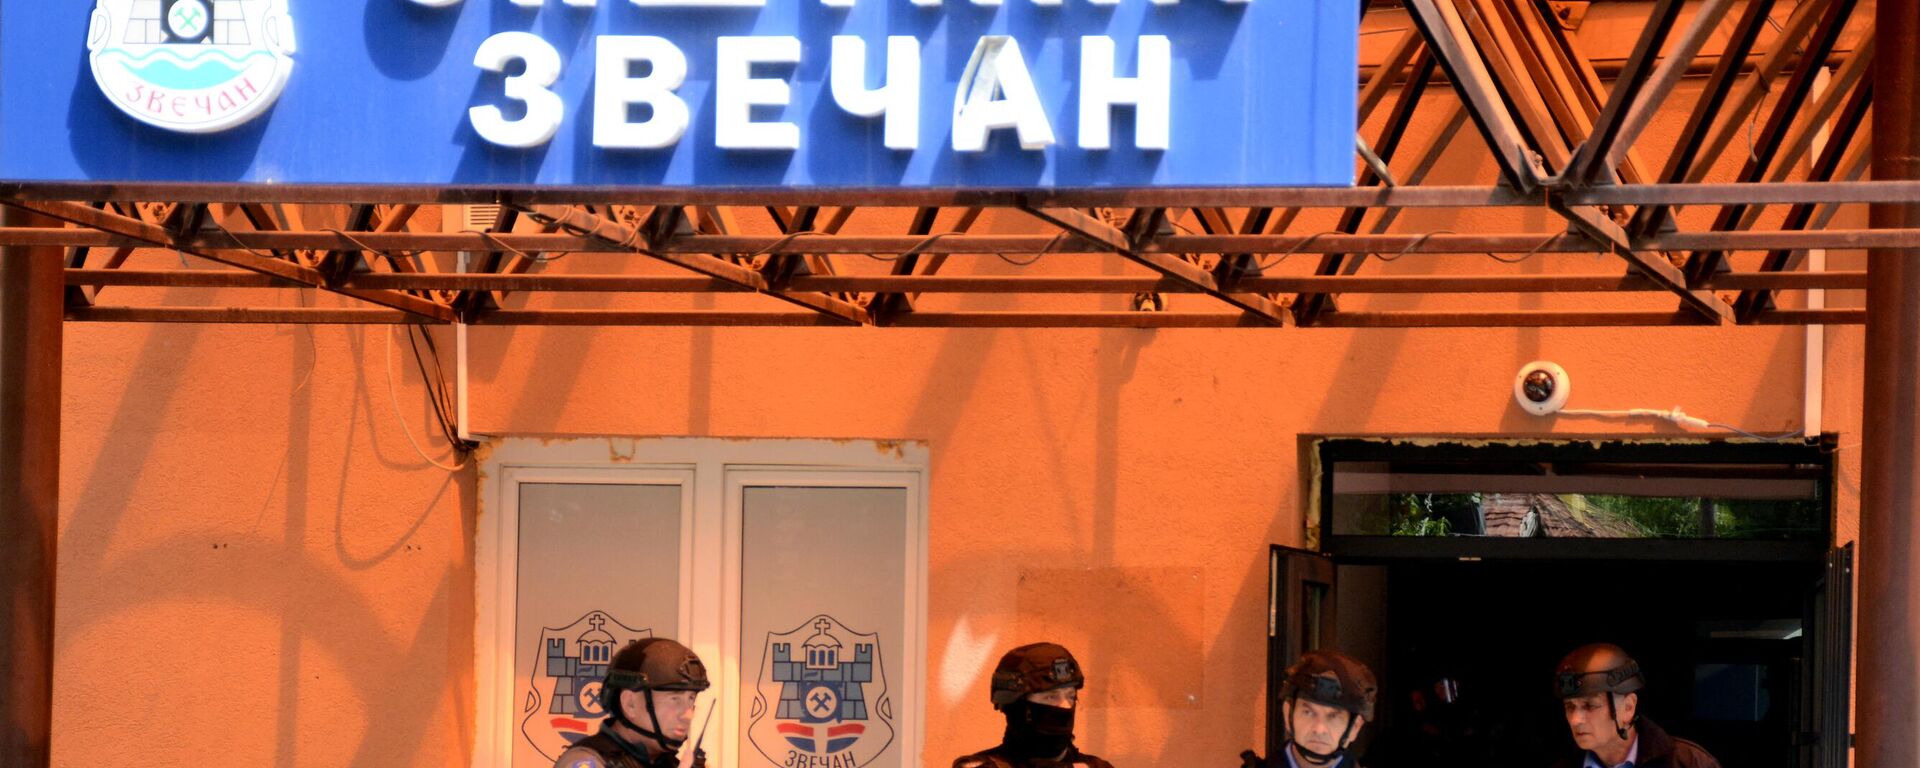 Kosovo riot police along with KFOR military police, secure access to a municipal building in Zvecan as Kosovo Serbs gather outside the building after police helped install ethnic Albanian mayors following controversial elections.  - Sputnik International, 1920, 05.06.2023